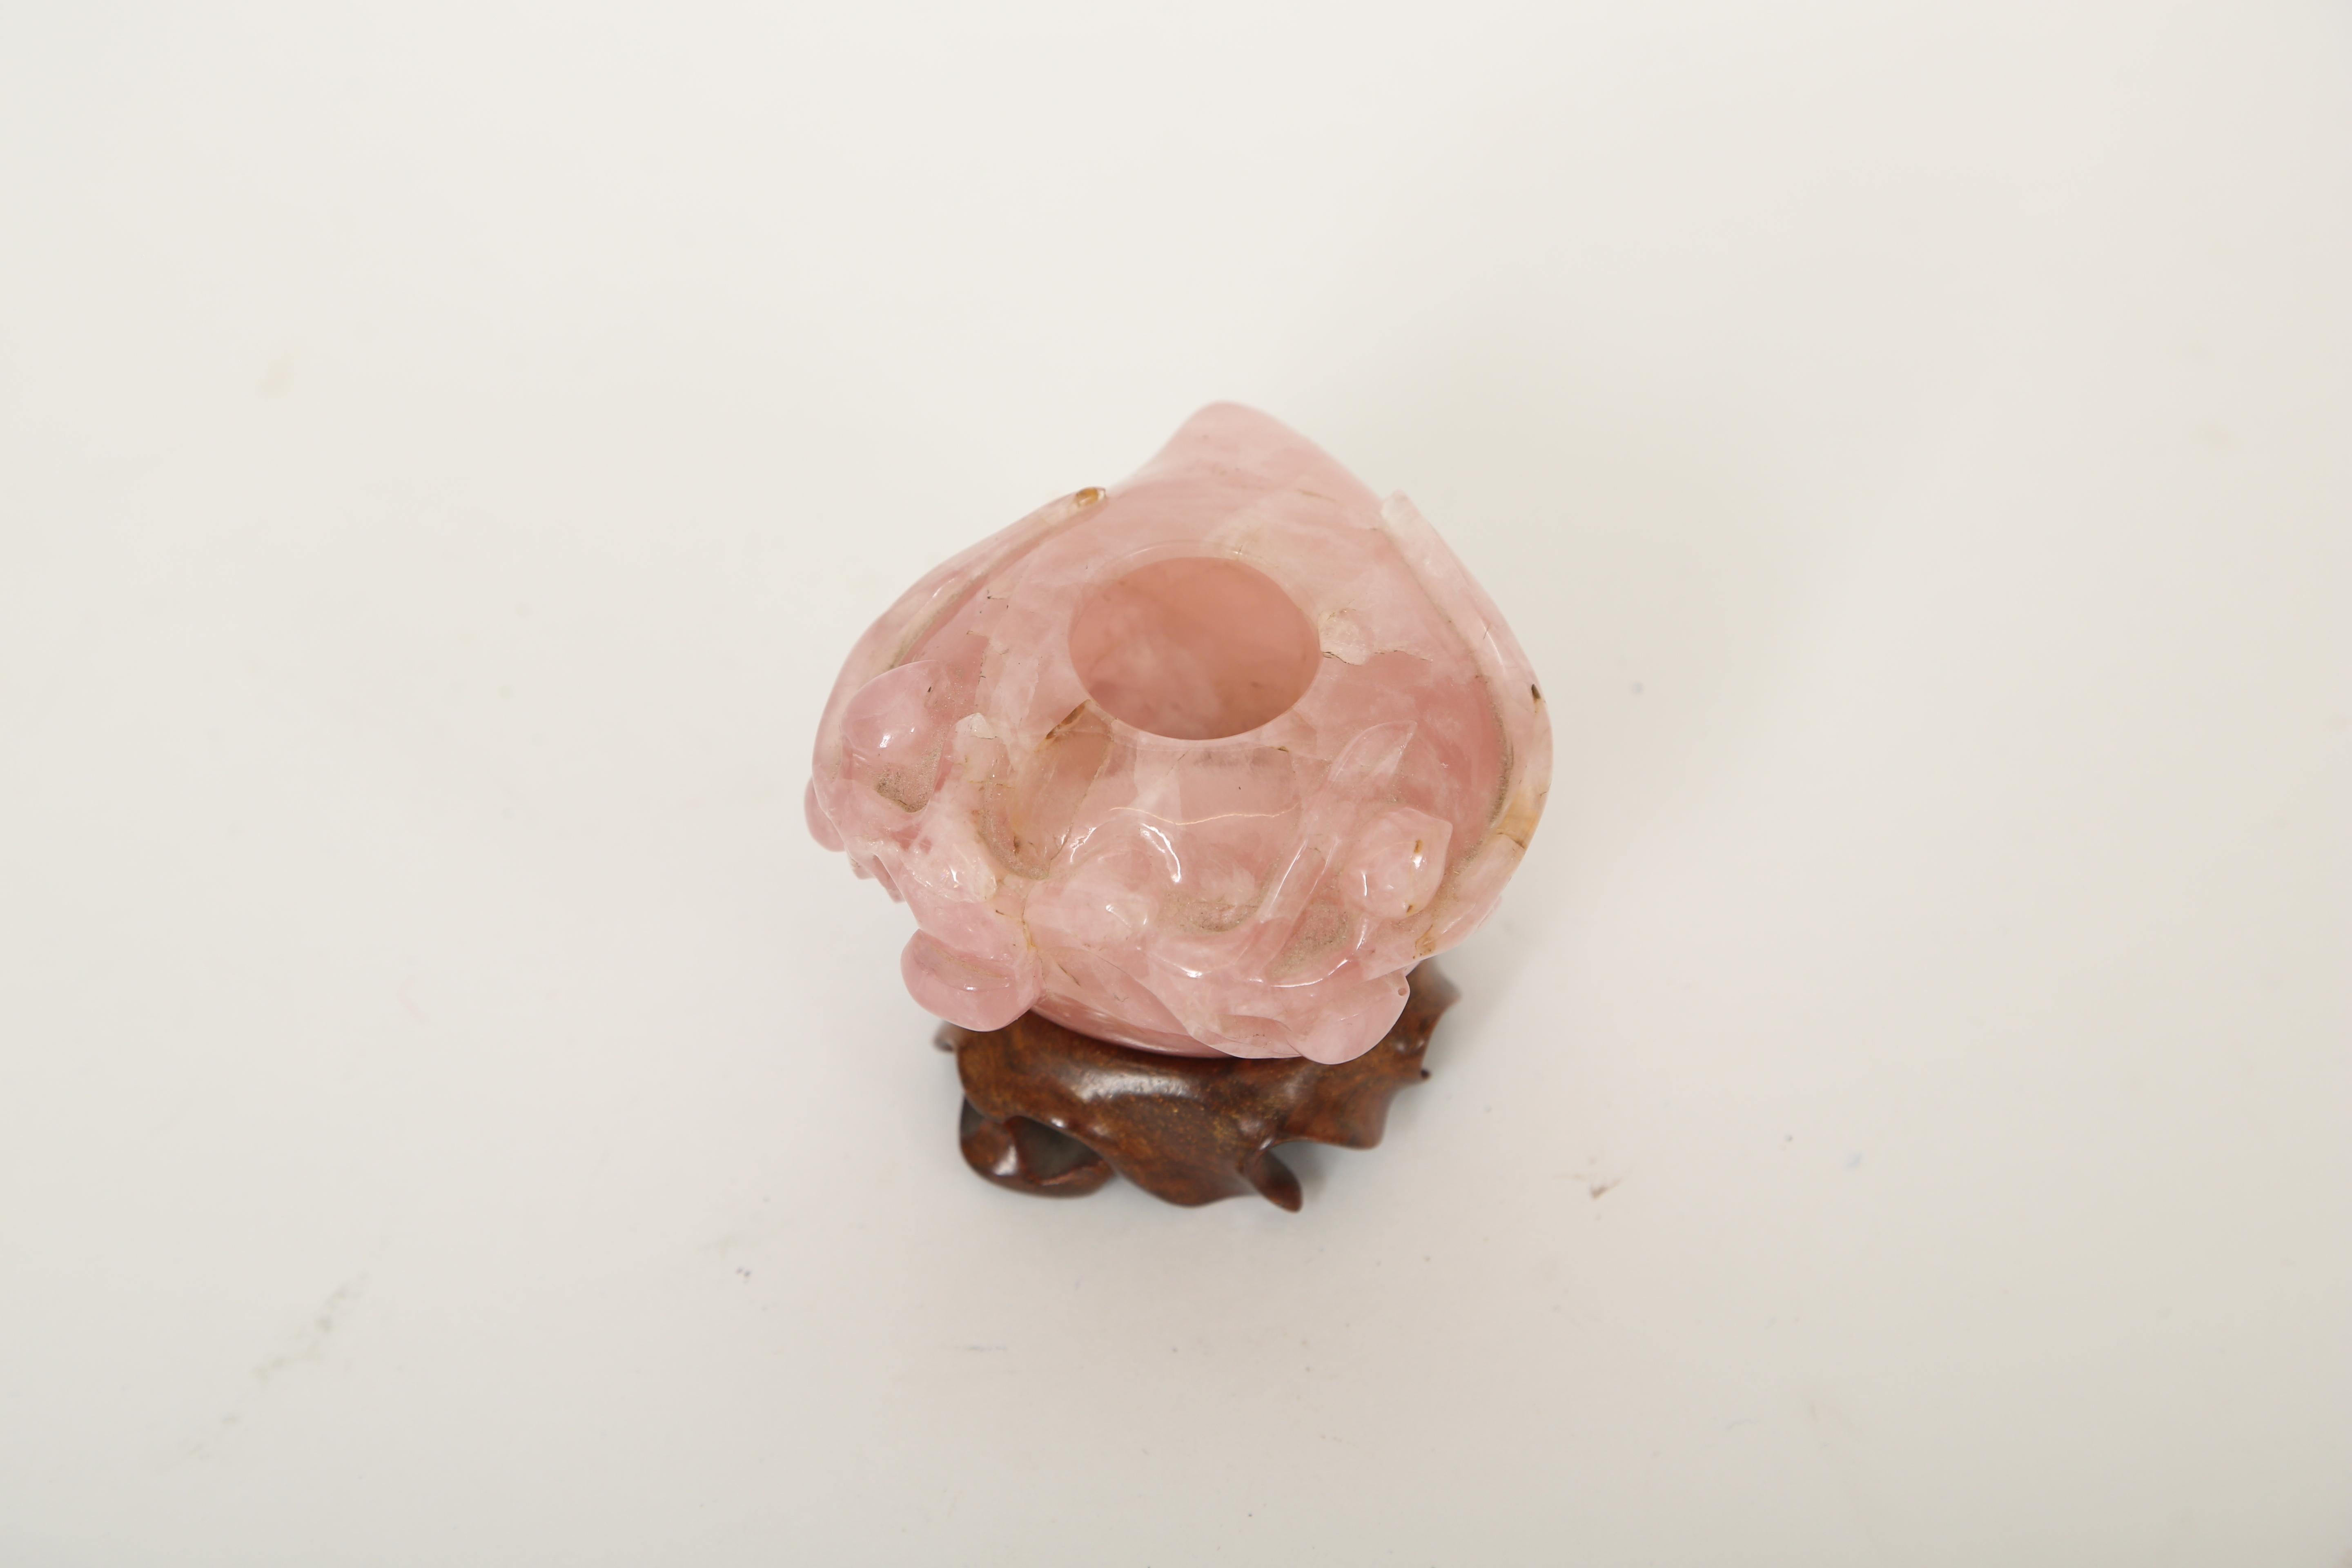 Chinese brush washer in the form of a peach, which represents wisdom. The peach is hand carved from rose quartz, a semi precious stone, and the stand was hand carved to fit. Whether you collect brush washers or just like beautiful objects this rosy